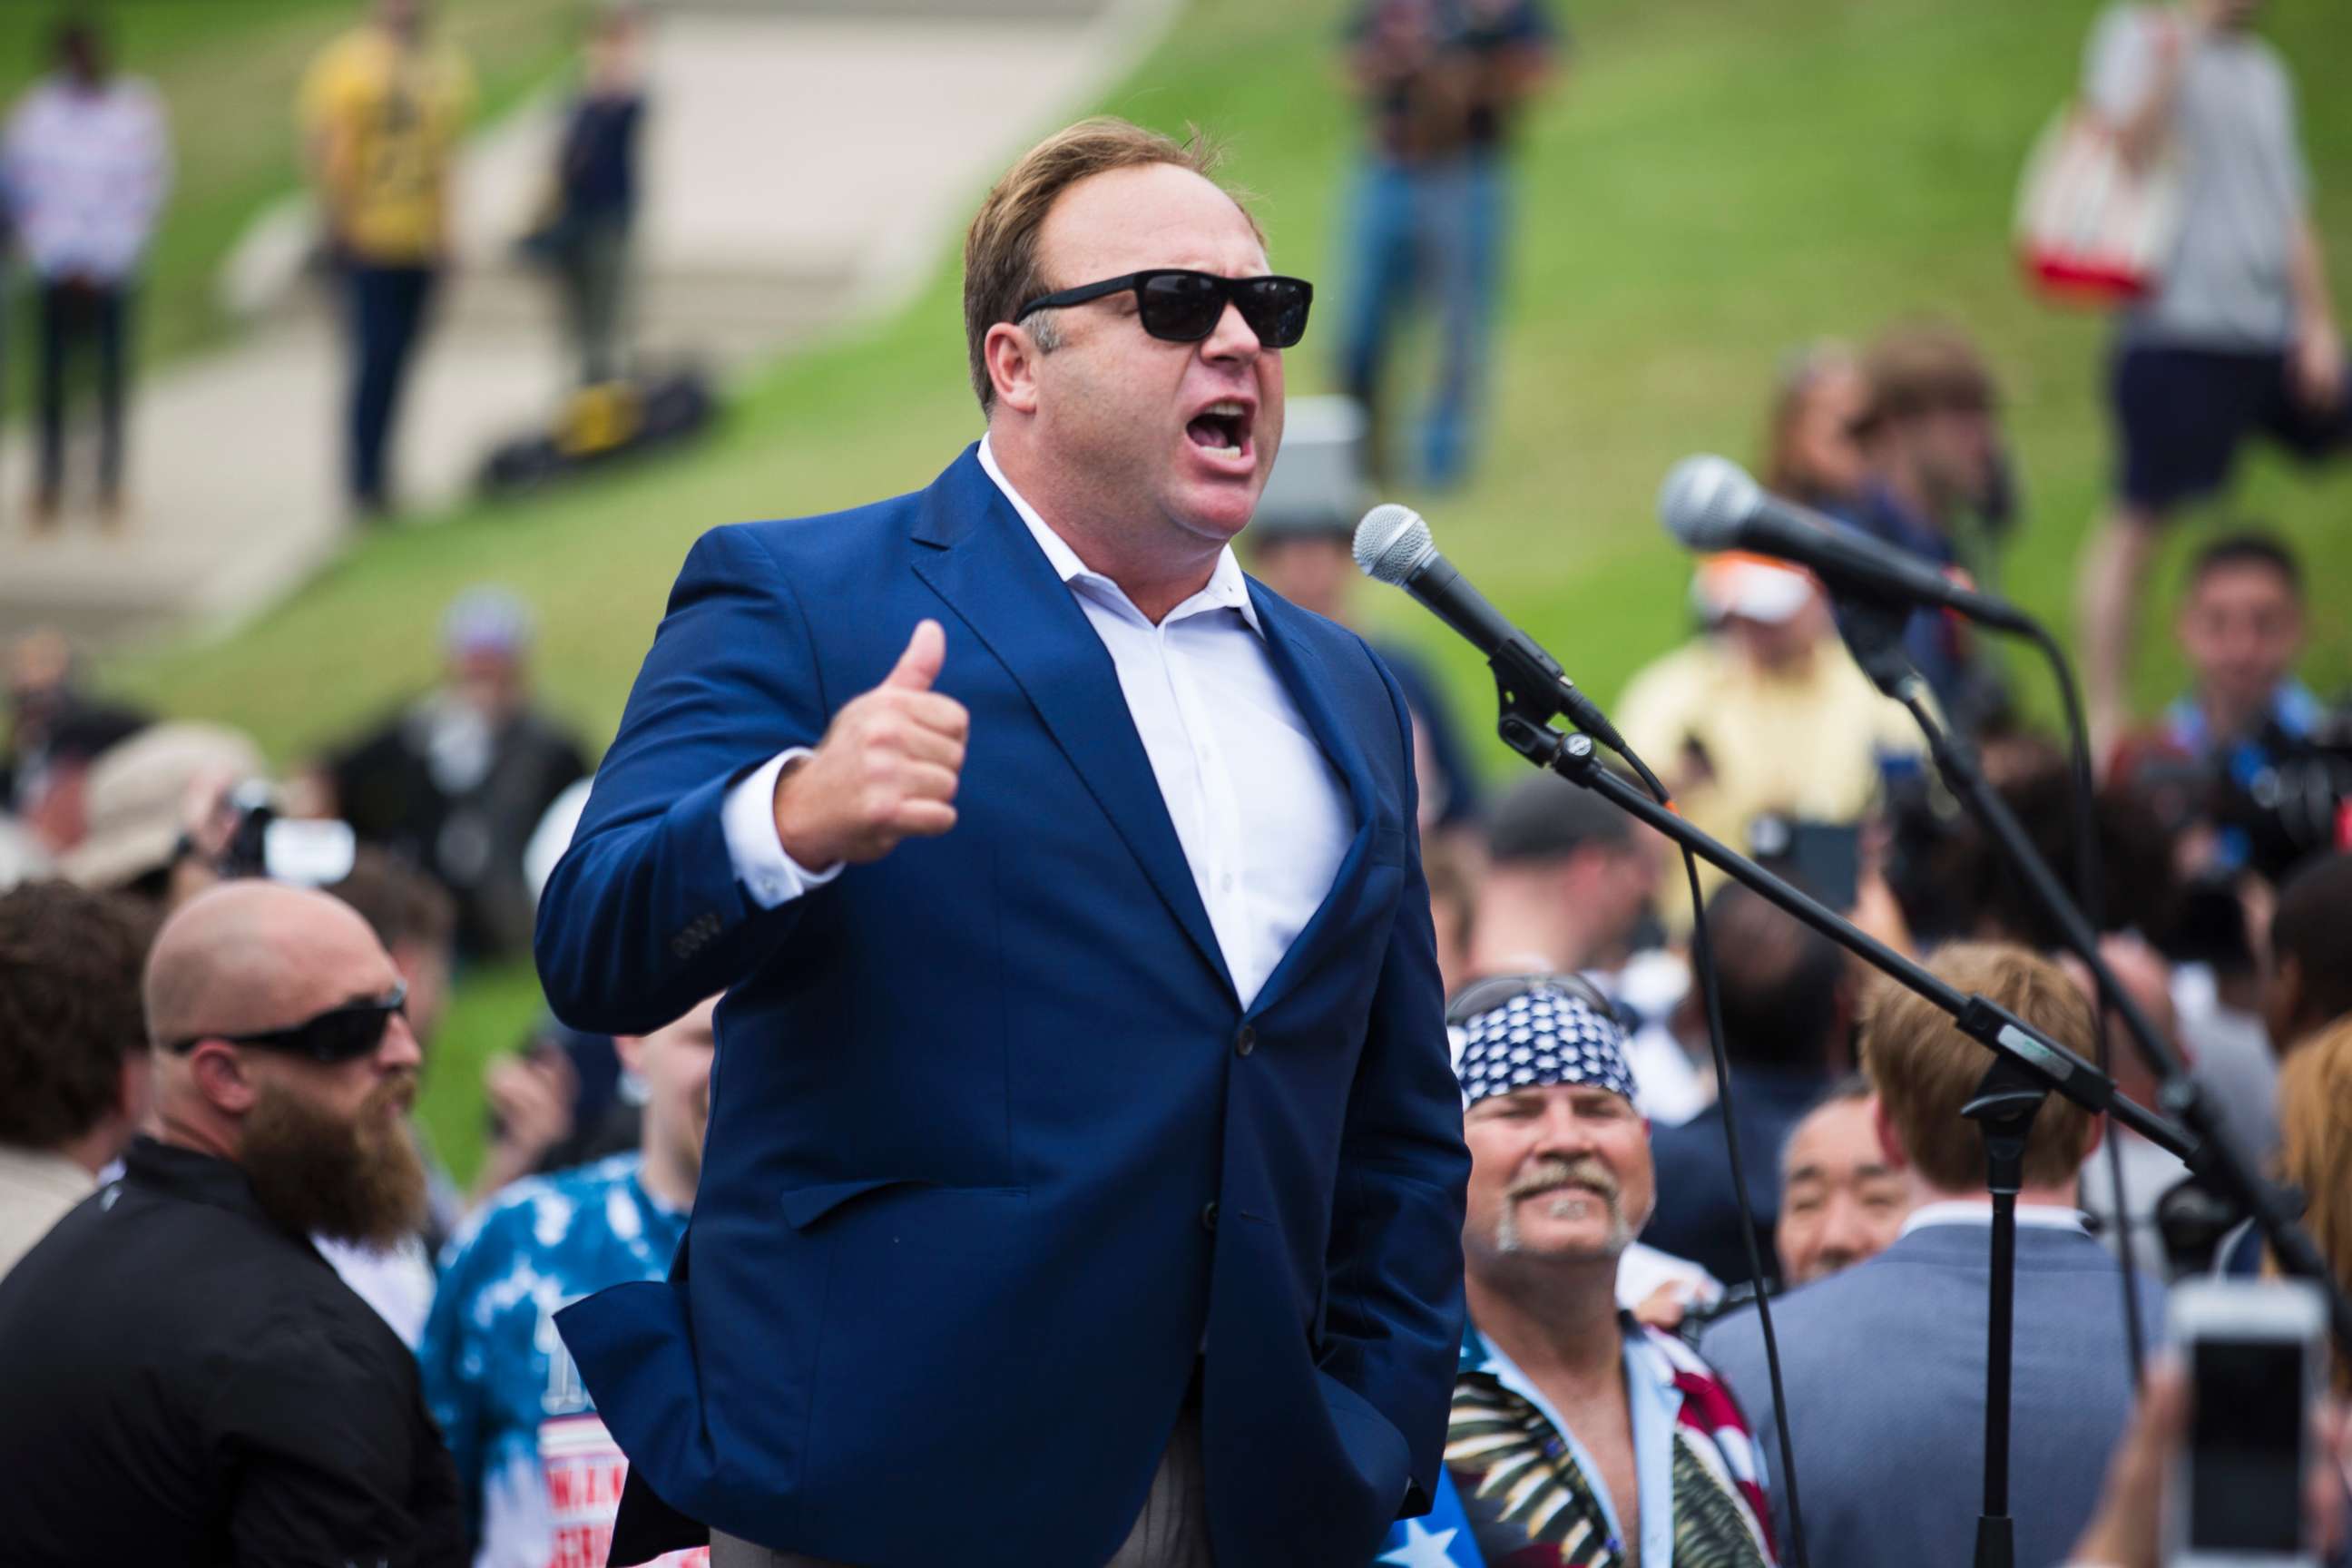 PHOTO: Conspiracy theorist and radio talk show host Alex Jones speaks during a rally in support of Donald Trump near the Republican National Convention July 18, 2016 in Cleveland.